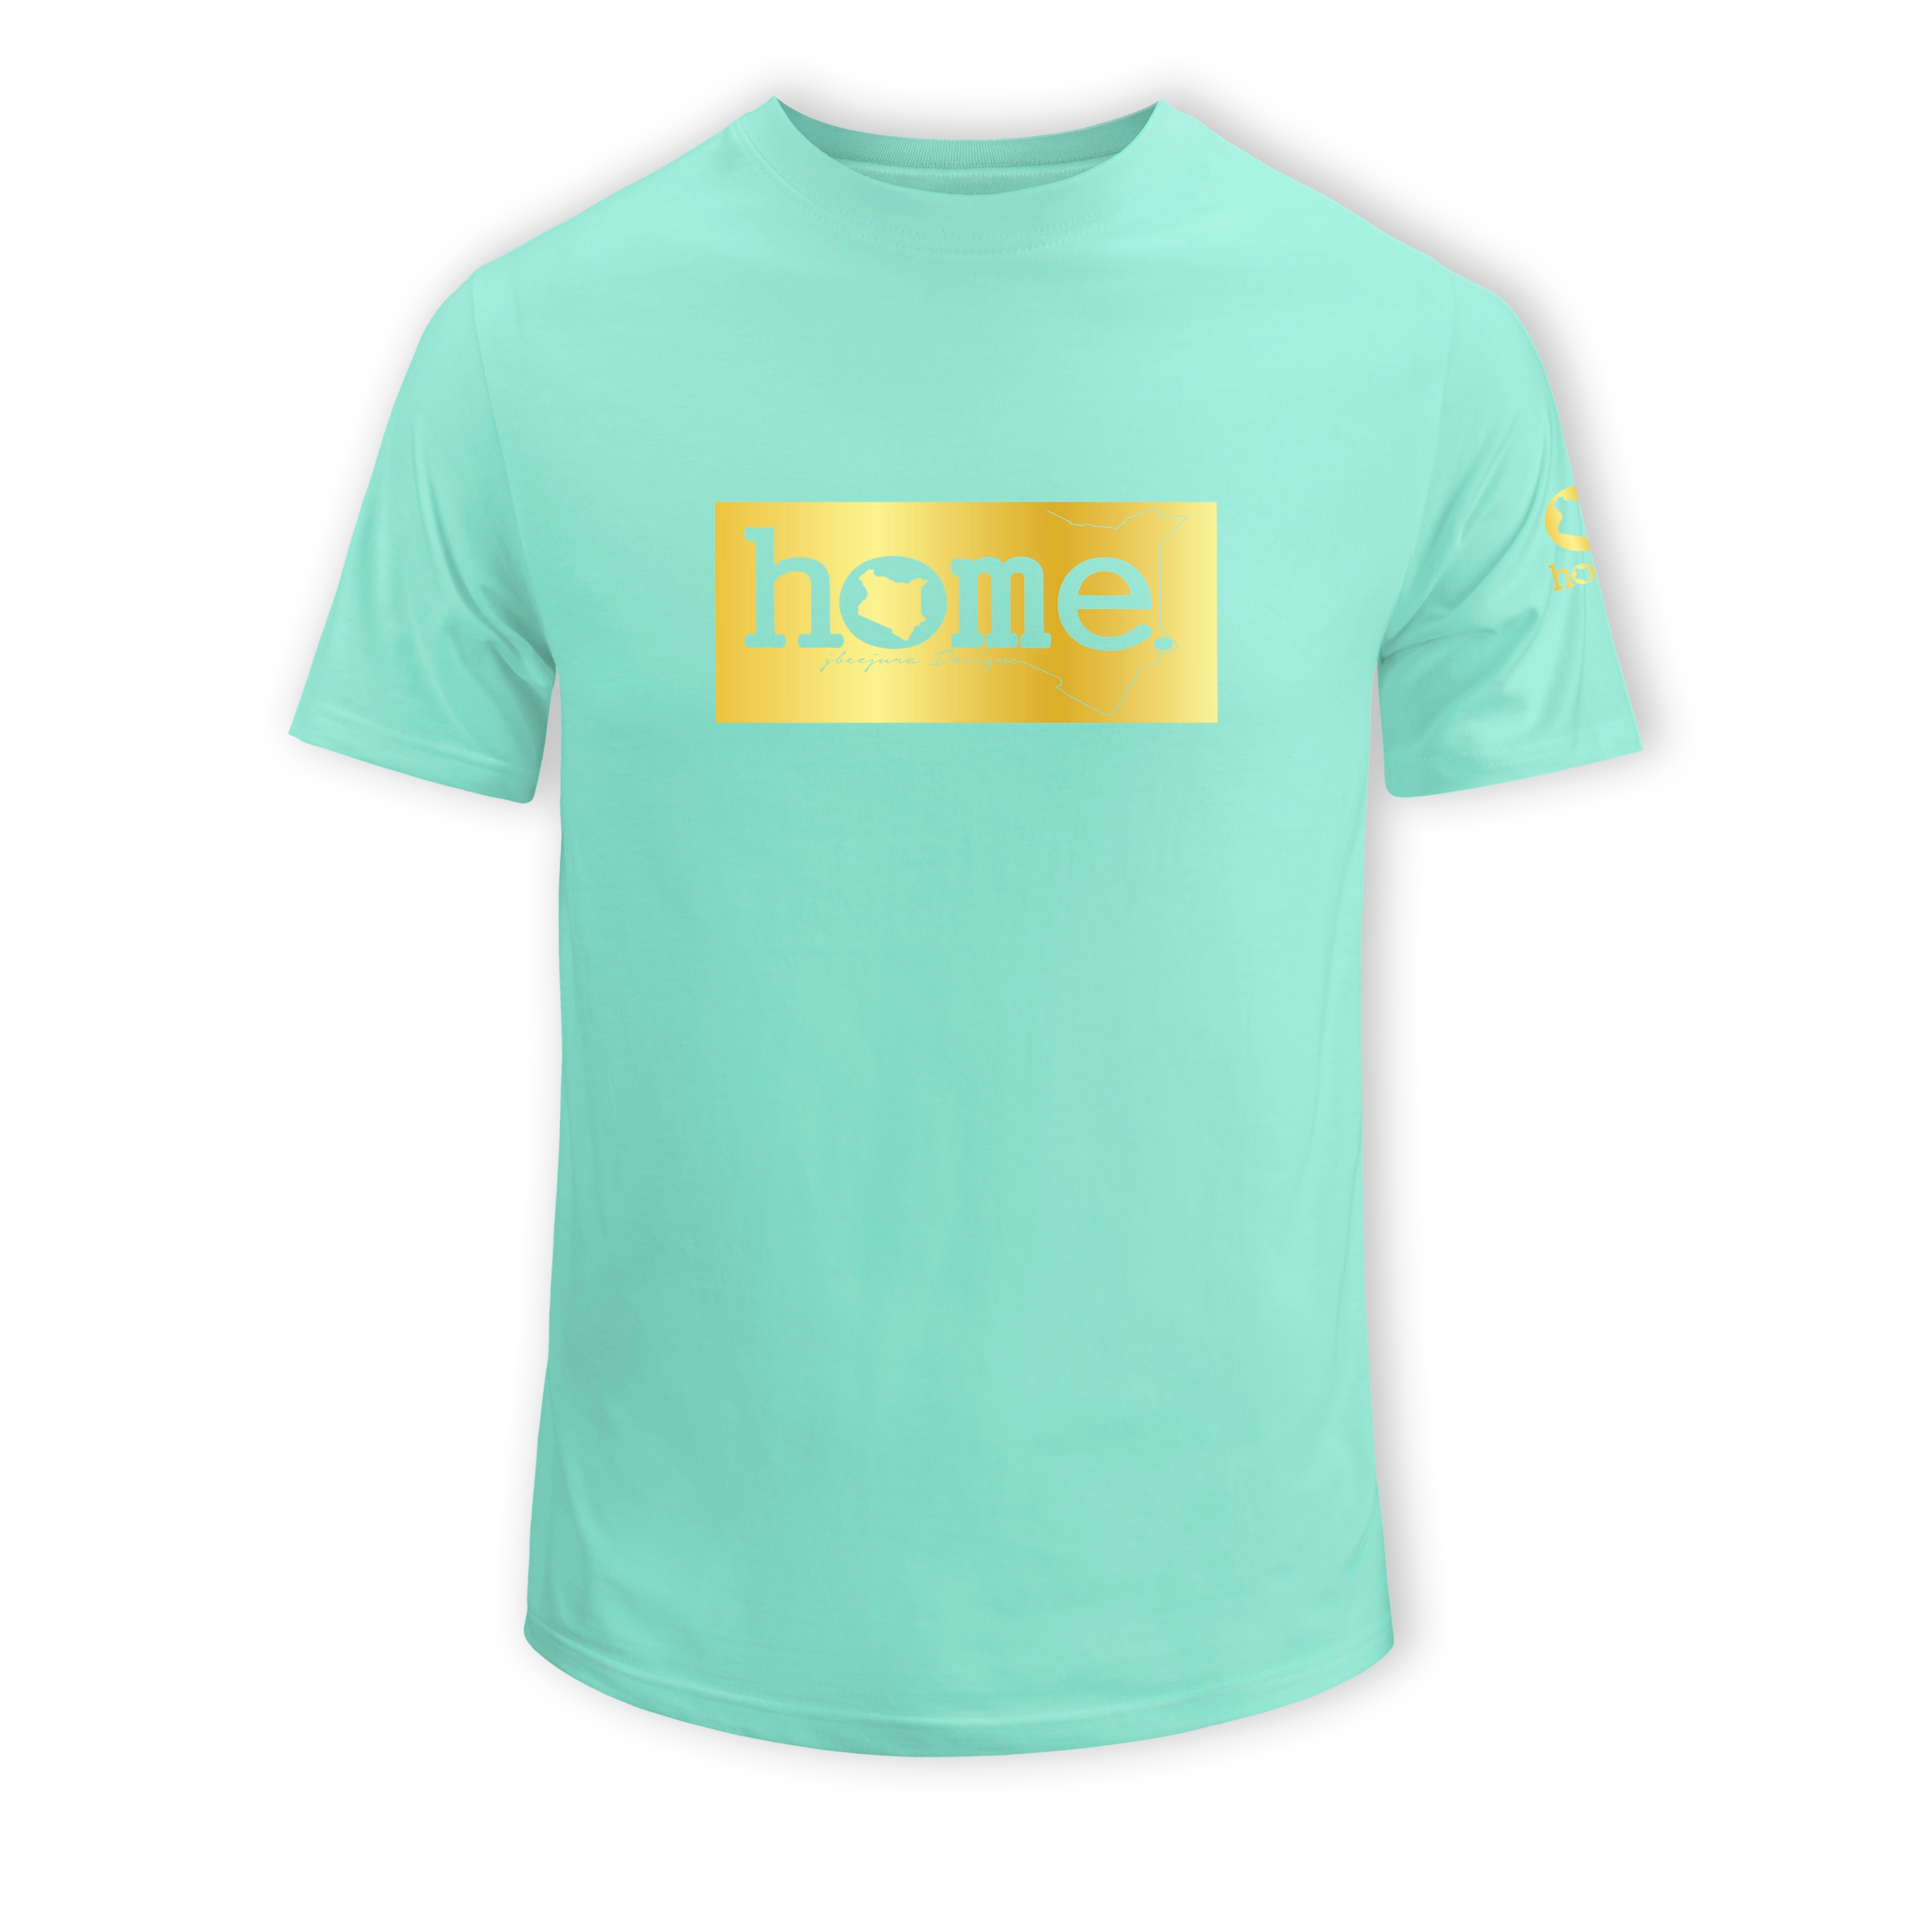 home_254 SHORT-SLEEVED TURQUOISE GREEN T-SHIRT WITH A GOLD CLASSIC PRINT – COTTON PLUS FABRIC